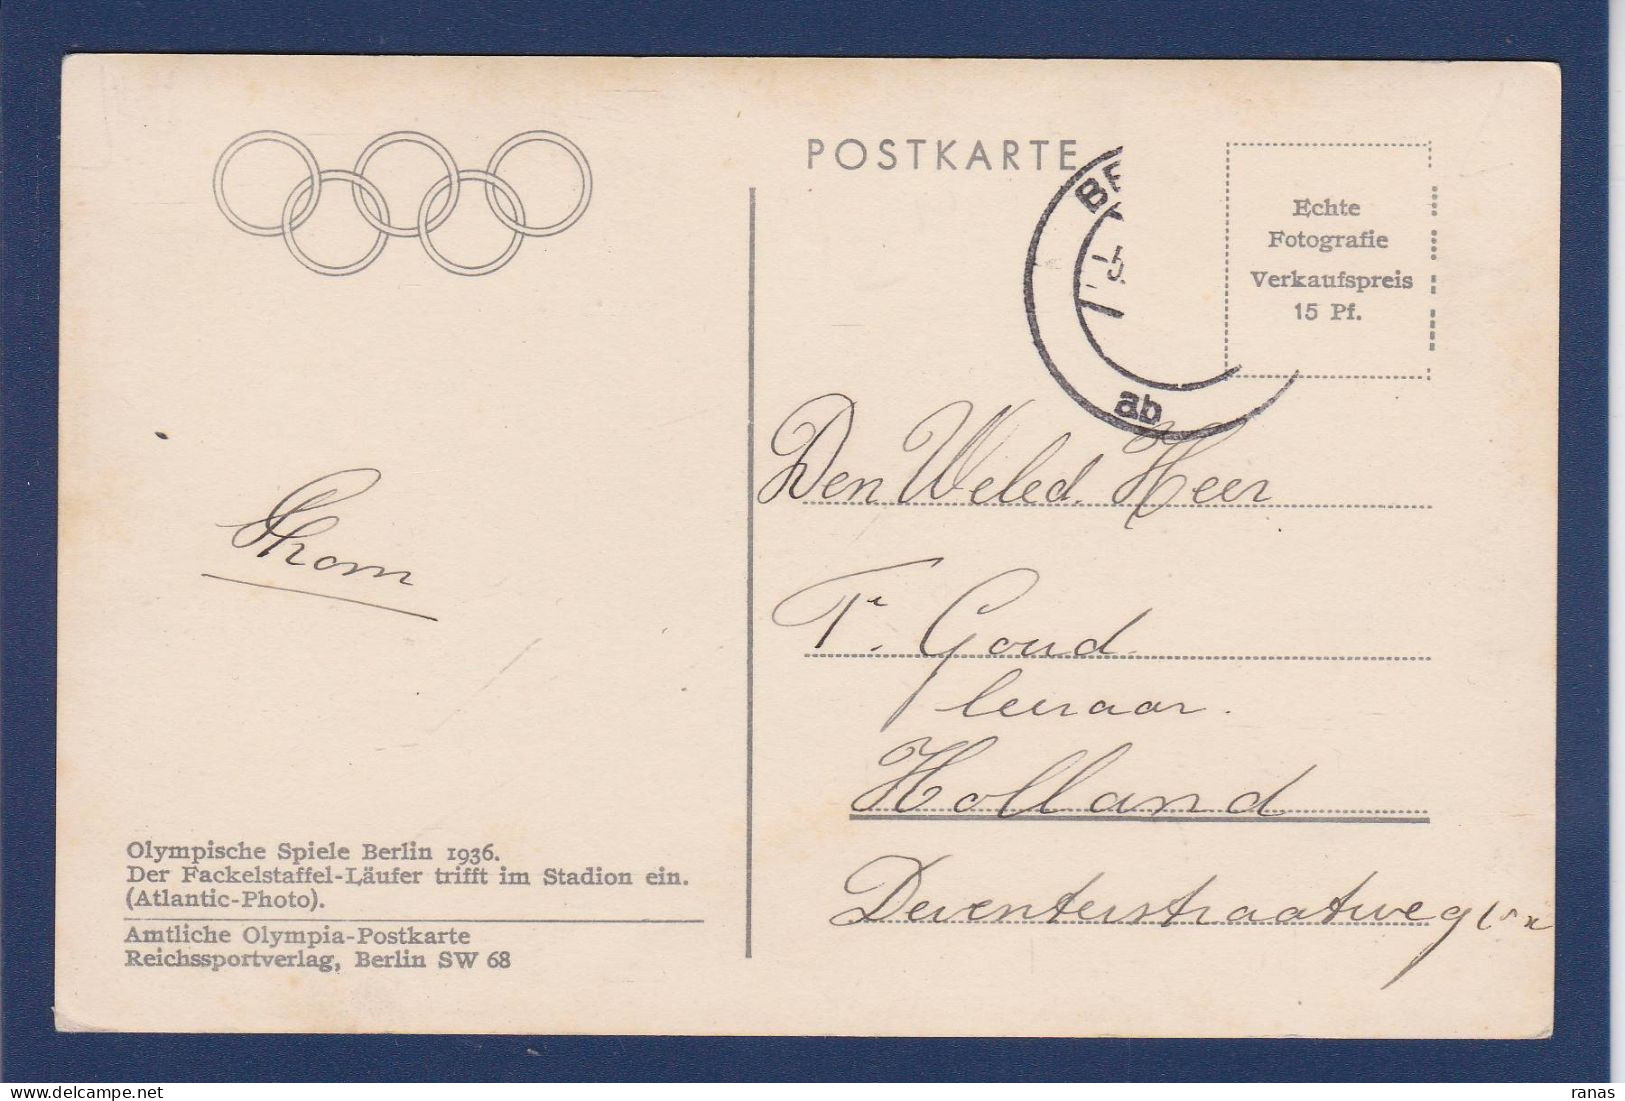 CPSM Jeux Olympiques JO Berlin 1936 Circulée - Olympic Games